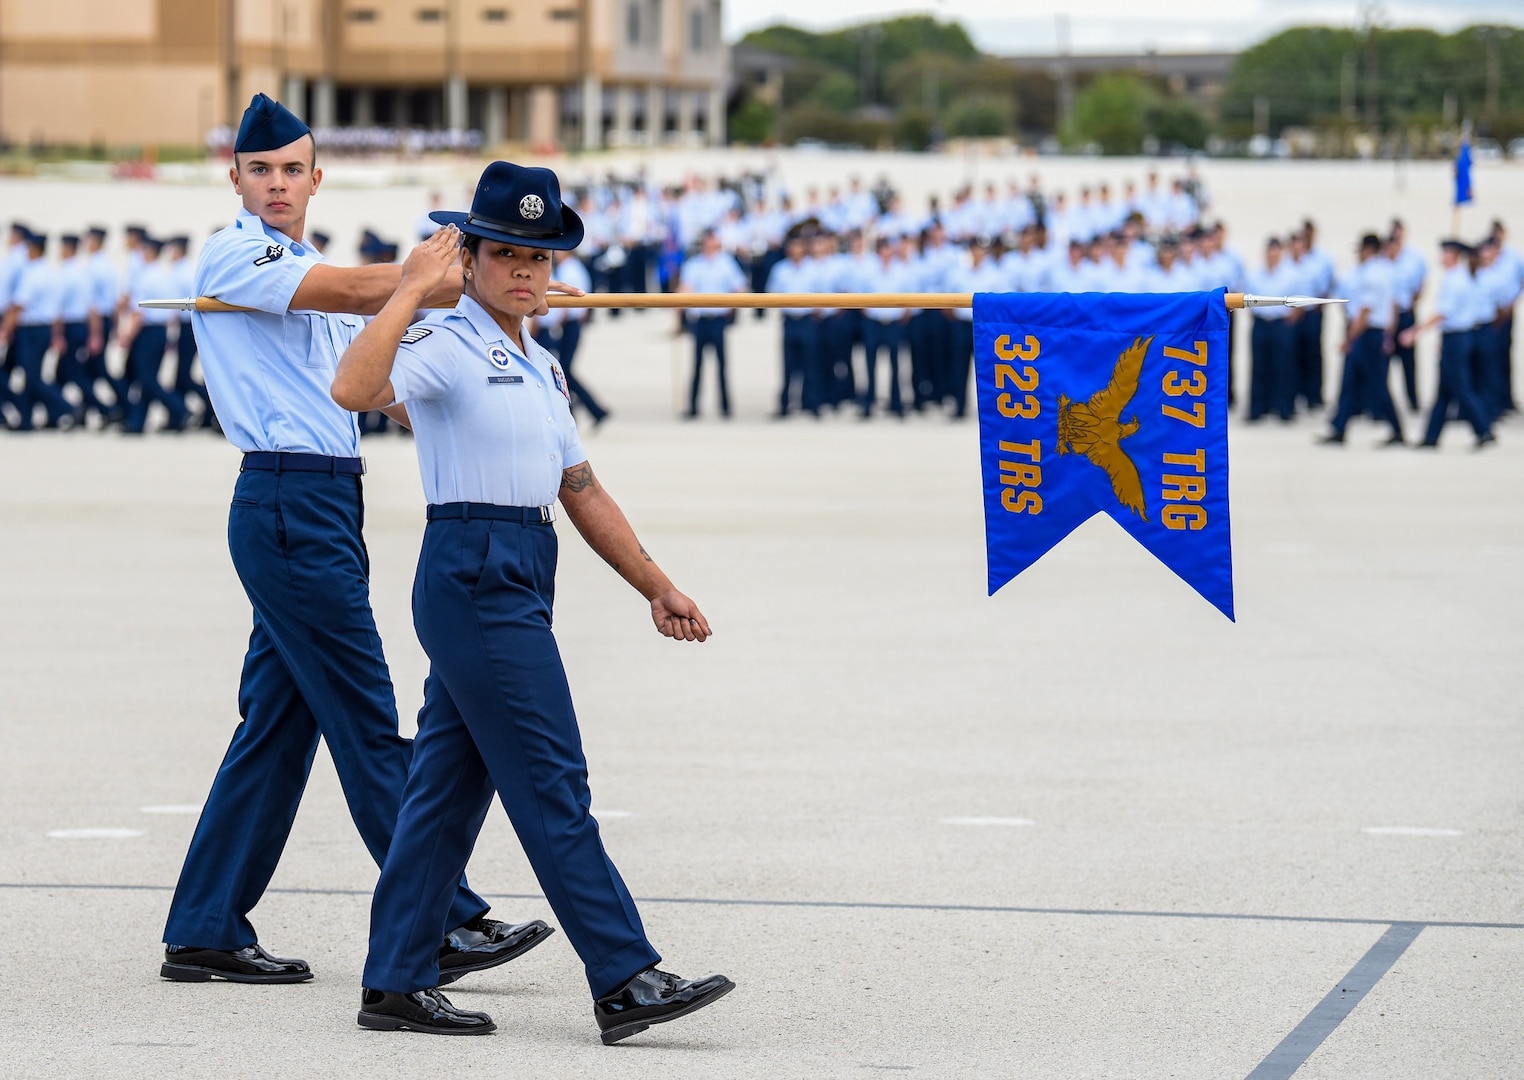 BMT increases guests, adds Airman's run to graduation ceremony > Joint